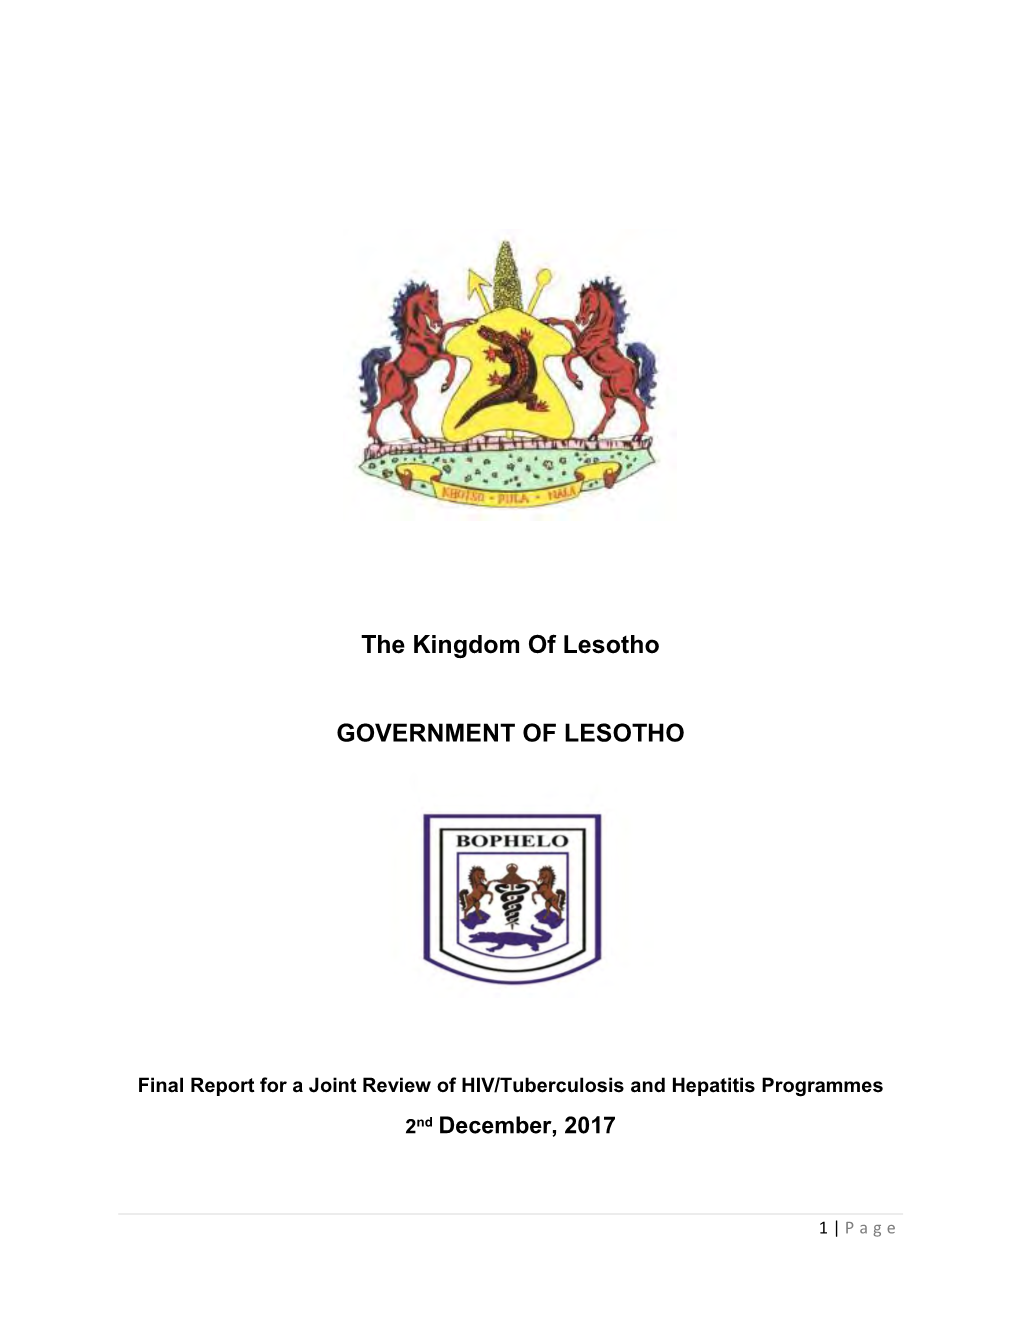 The Kingdom of Lesotho GOVERNMENT OF